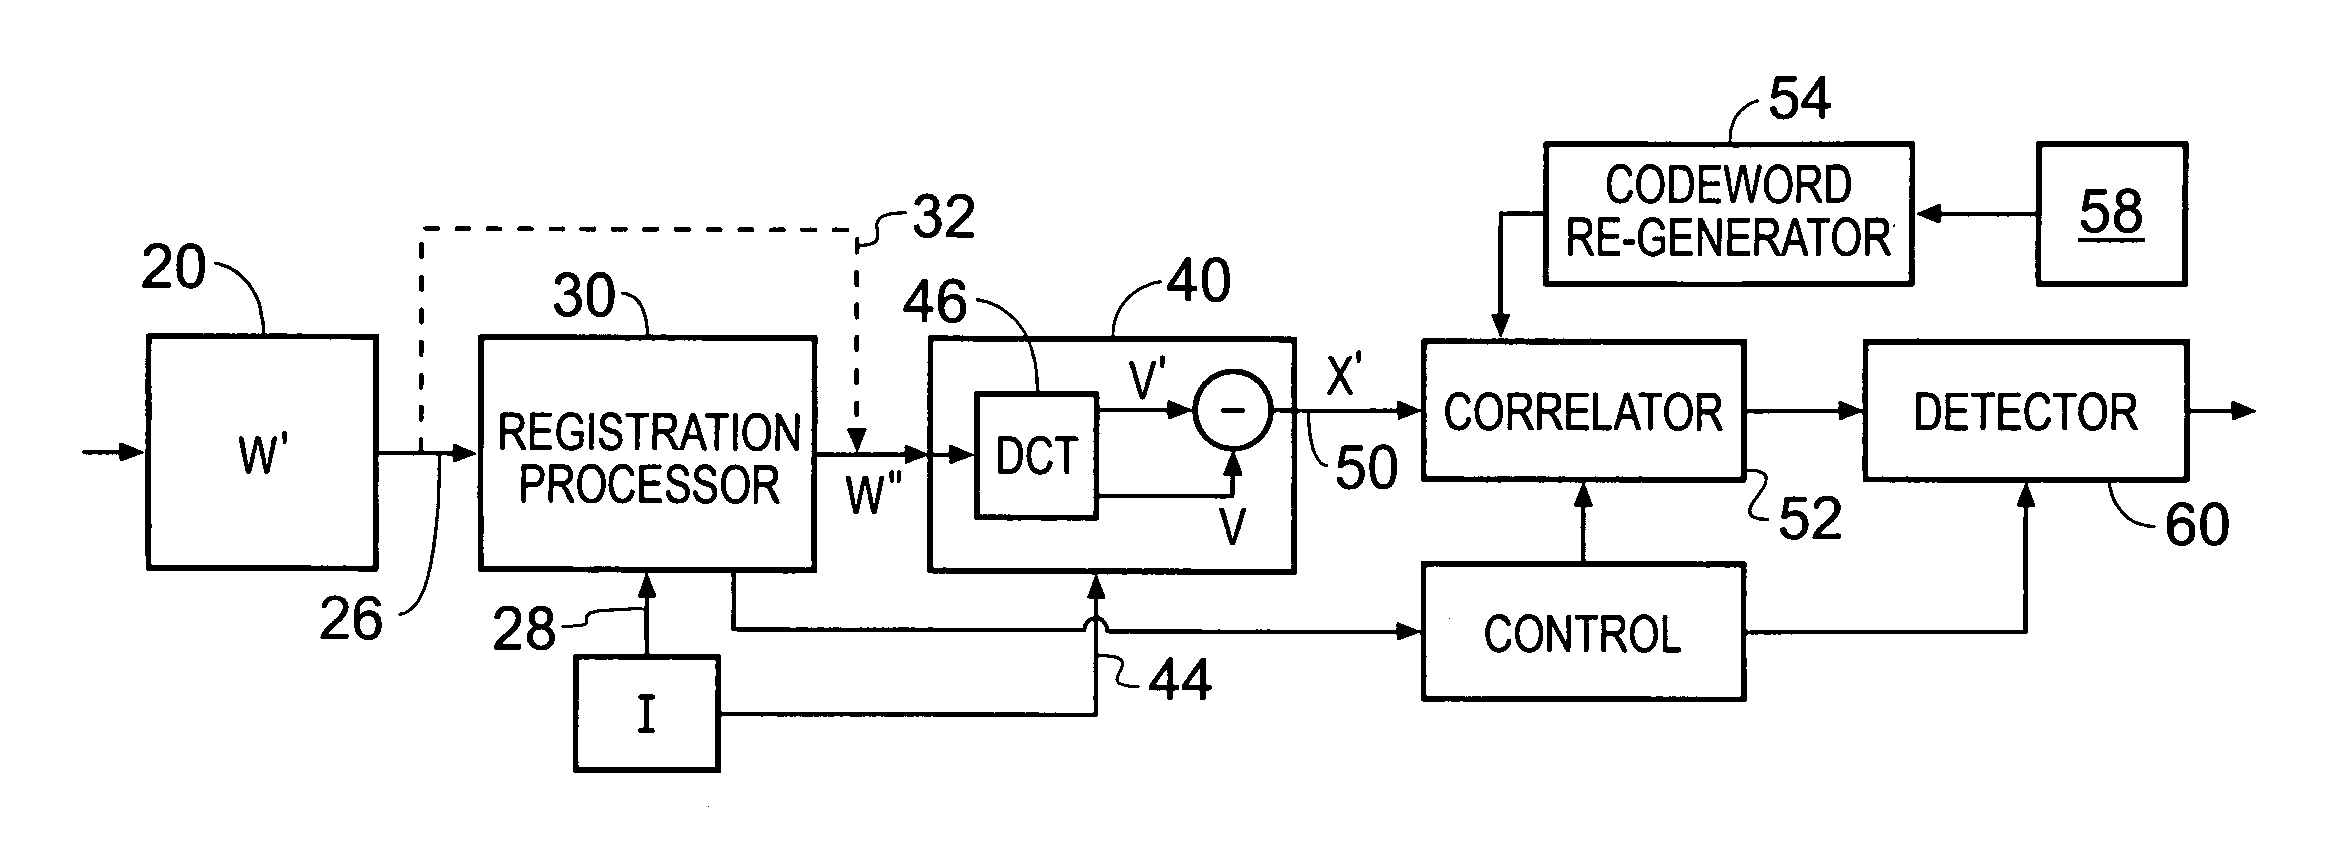 Apparatus and method for detecting embedded watermarks